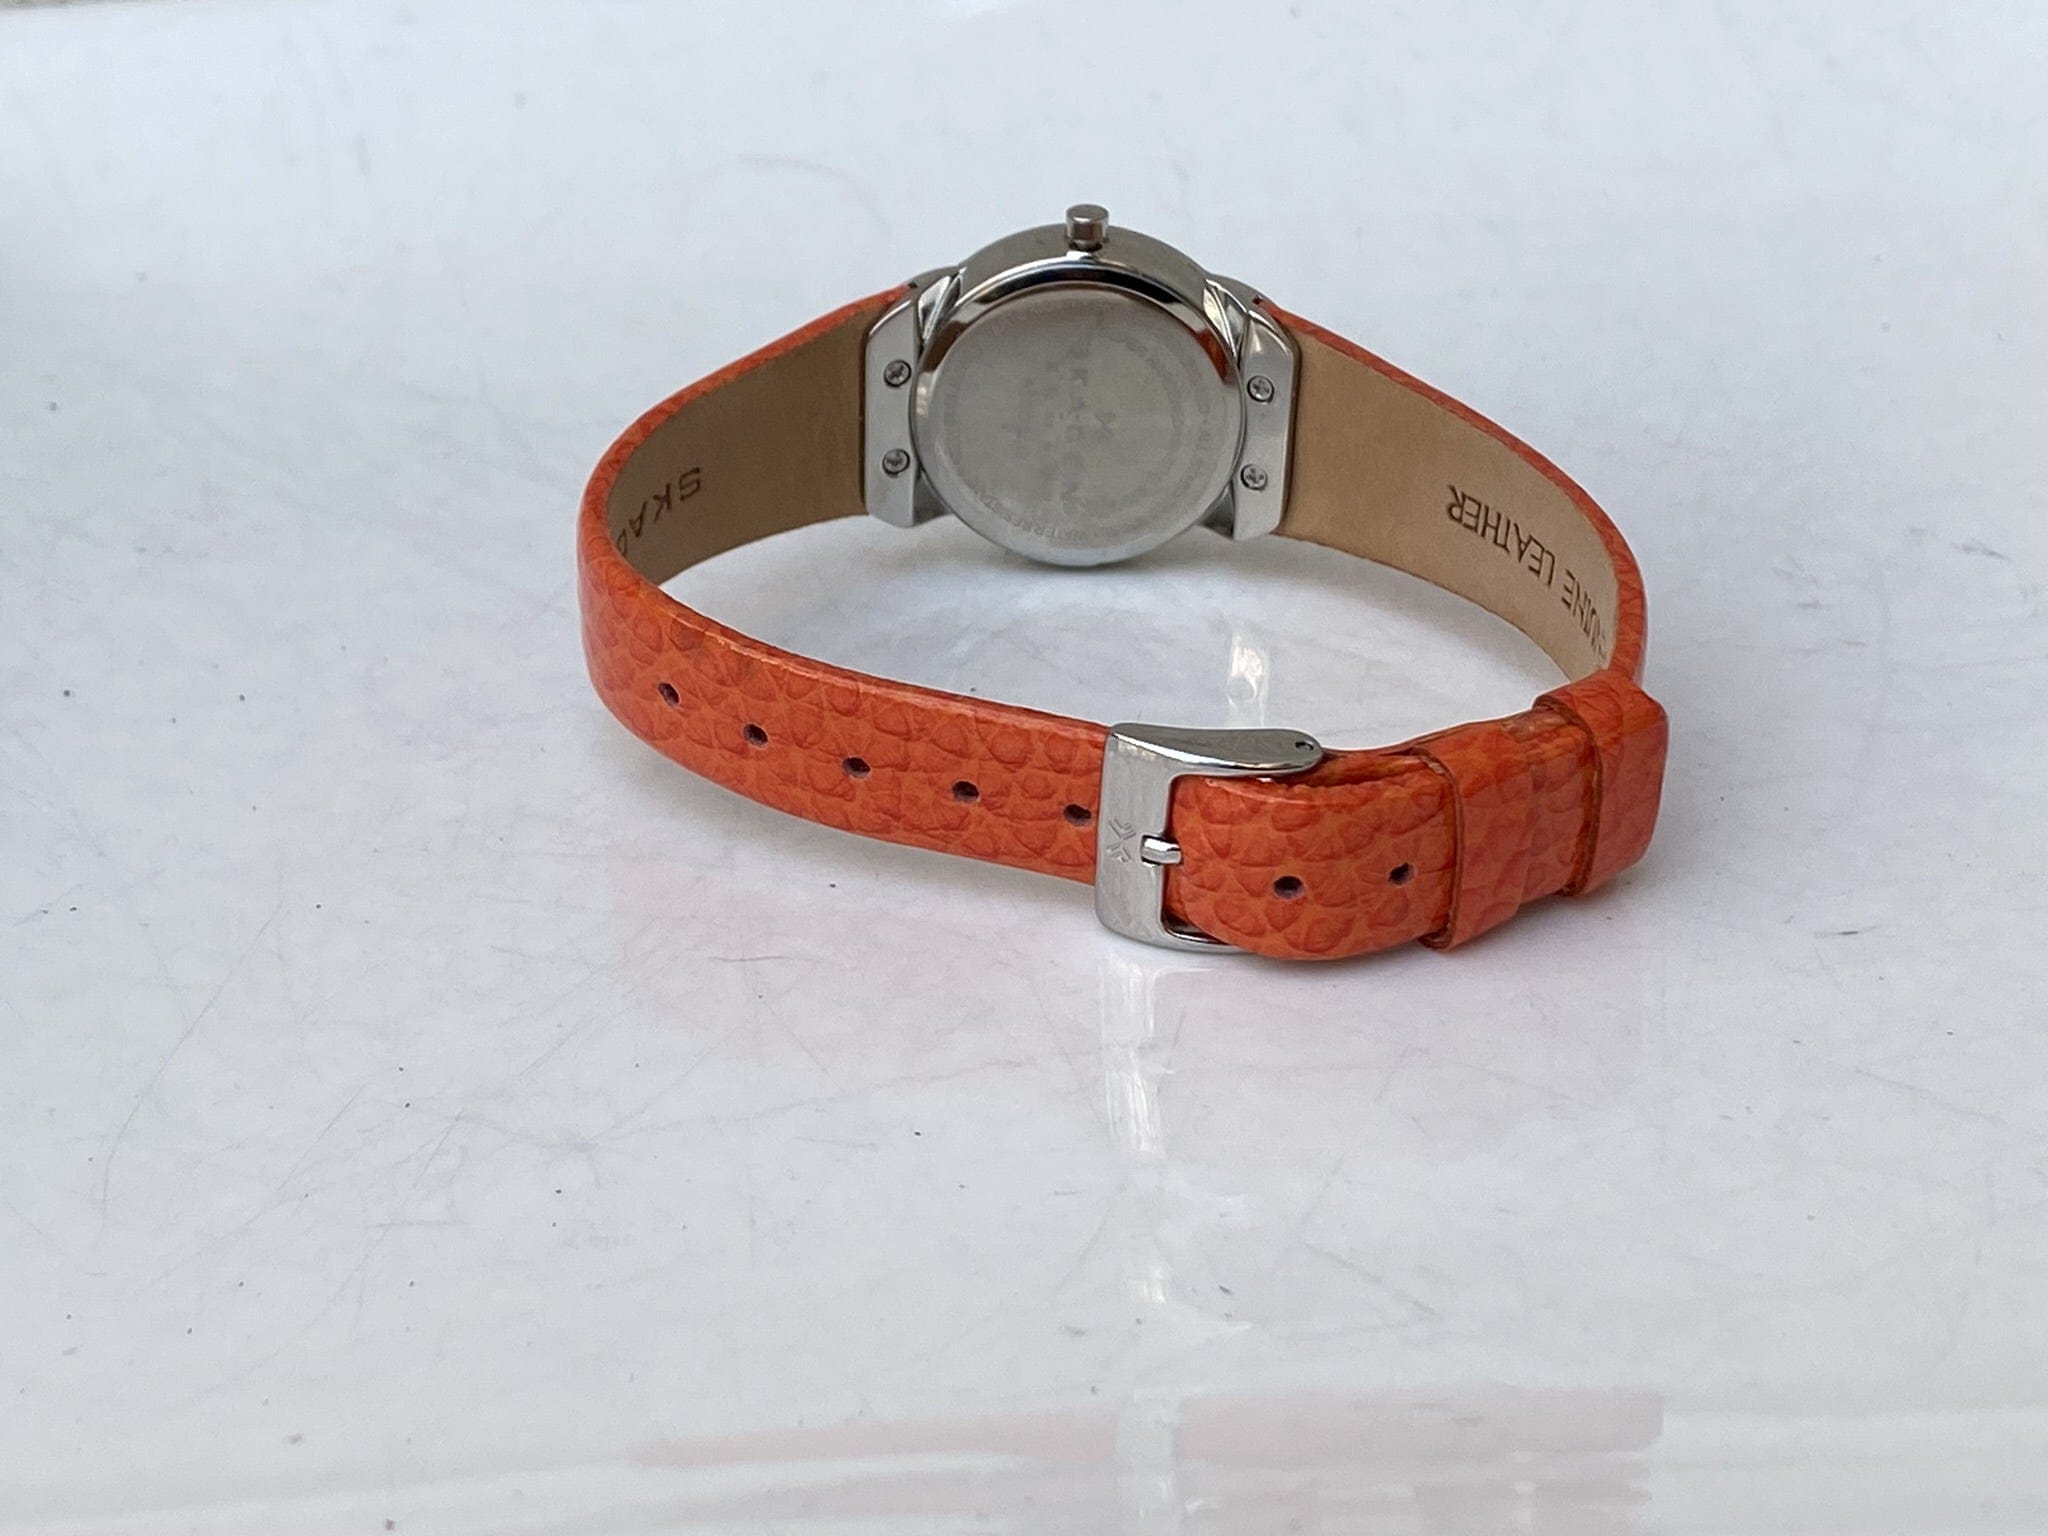 Skagen Women's Jeweled Silvertone Watch with Orange Leather Band - I Mikes Modern